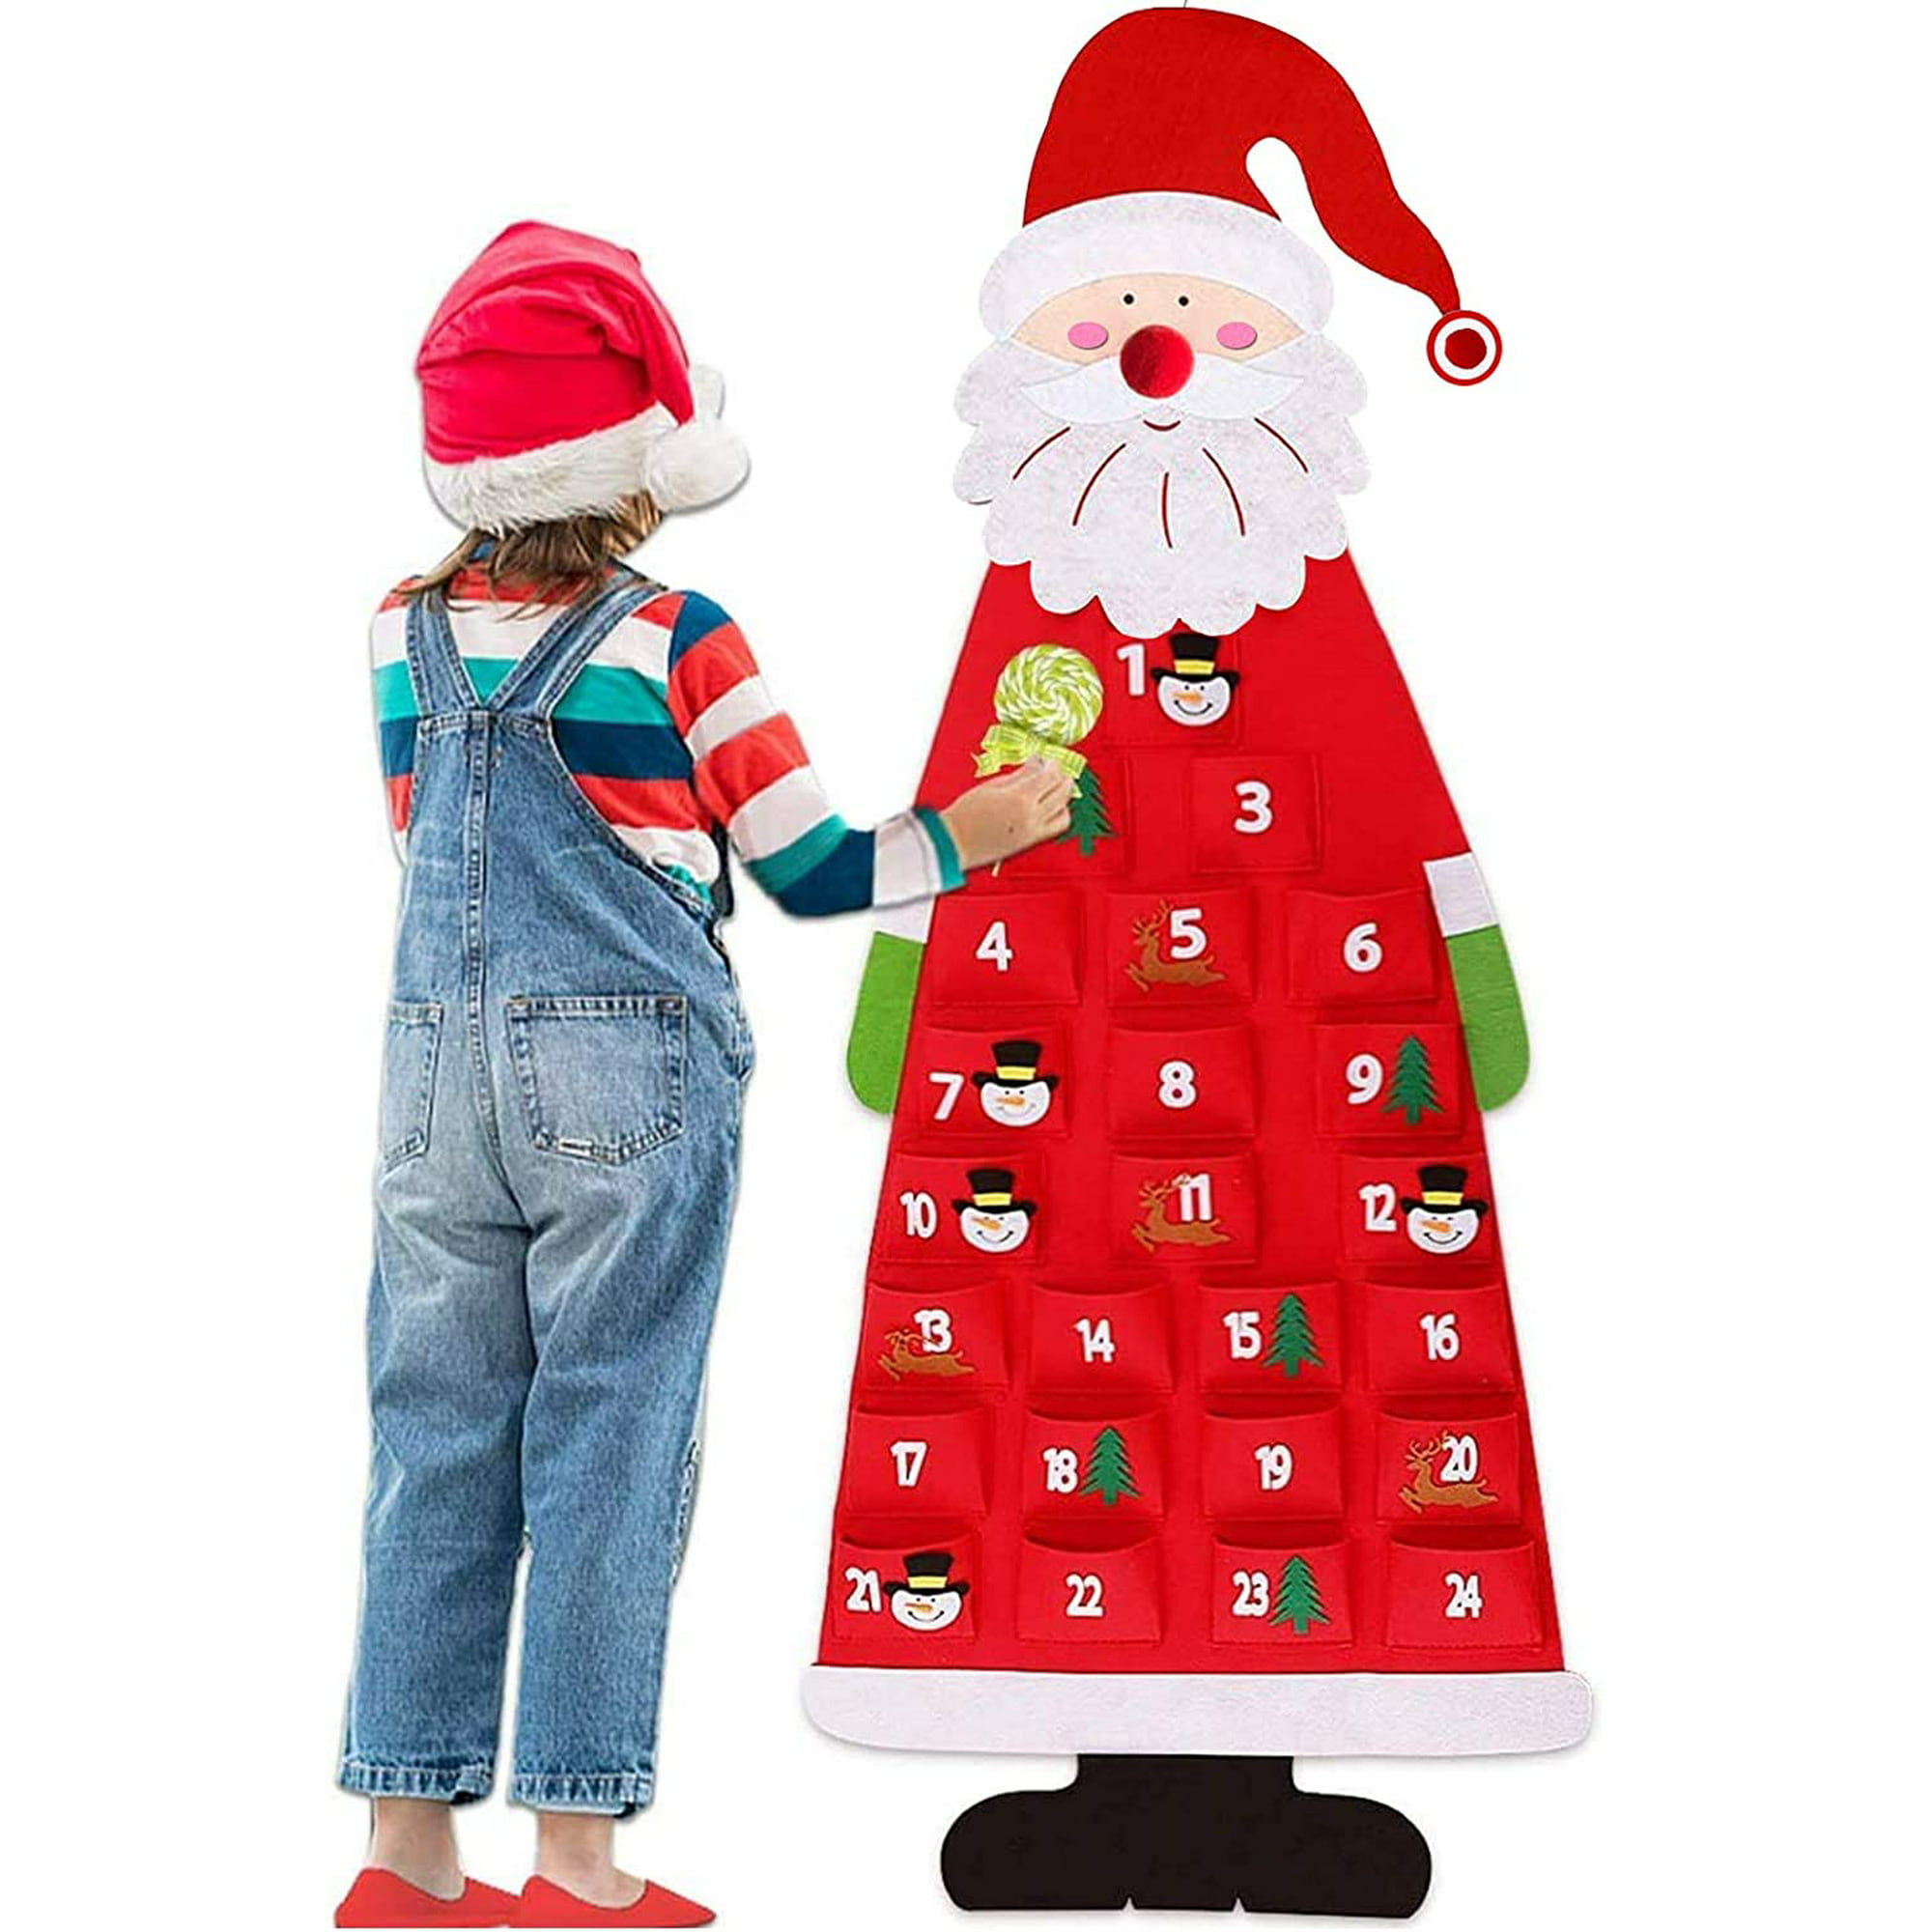 Anrapley 3.1ft DIY Felt Christmas Tree for Kids Christmas Tree with 33pcs Detachable Xmas Ornaments and LED String Light Window Door Wall Hanging Decorations Holiday New Year Party Gifts for Toddlers 